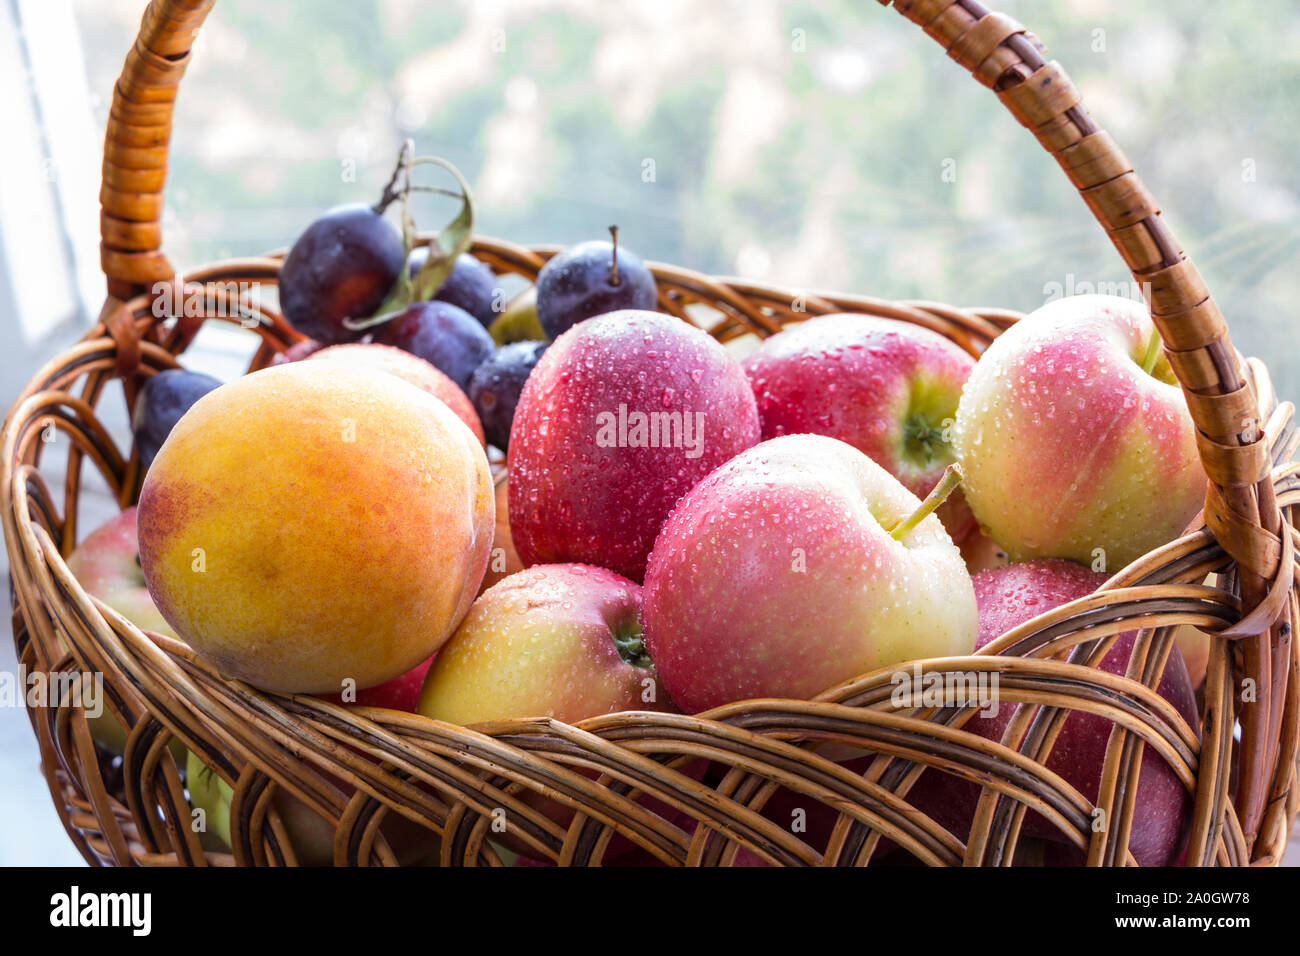 Wicker basket with washed fruits from new harvest in it. Ripe red apples, peach, and plums, water droplets on them. Stock Photo